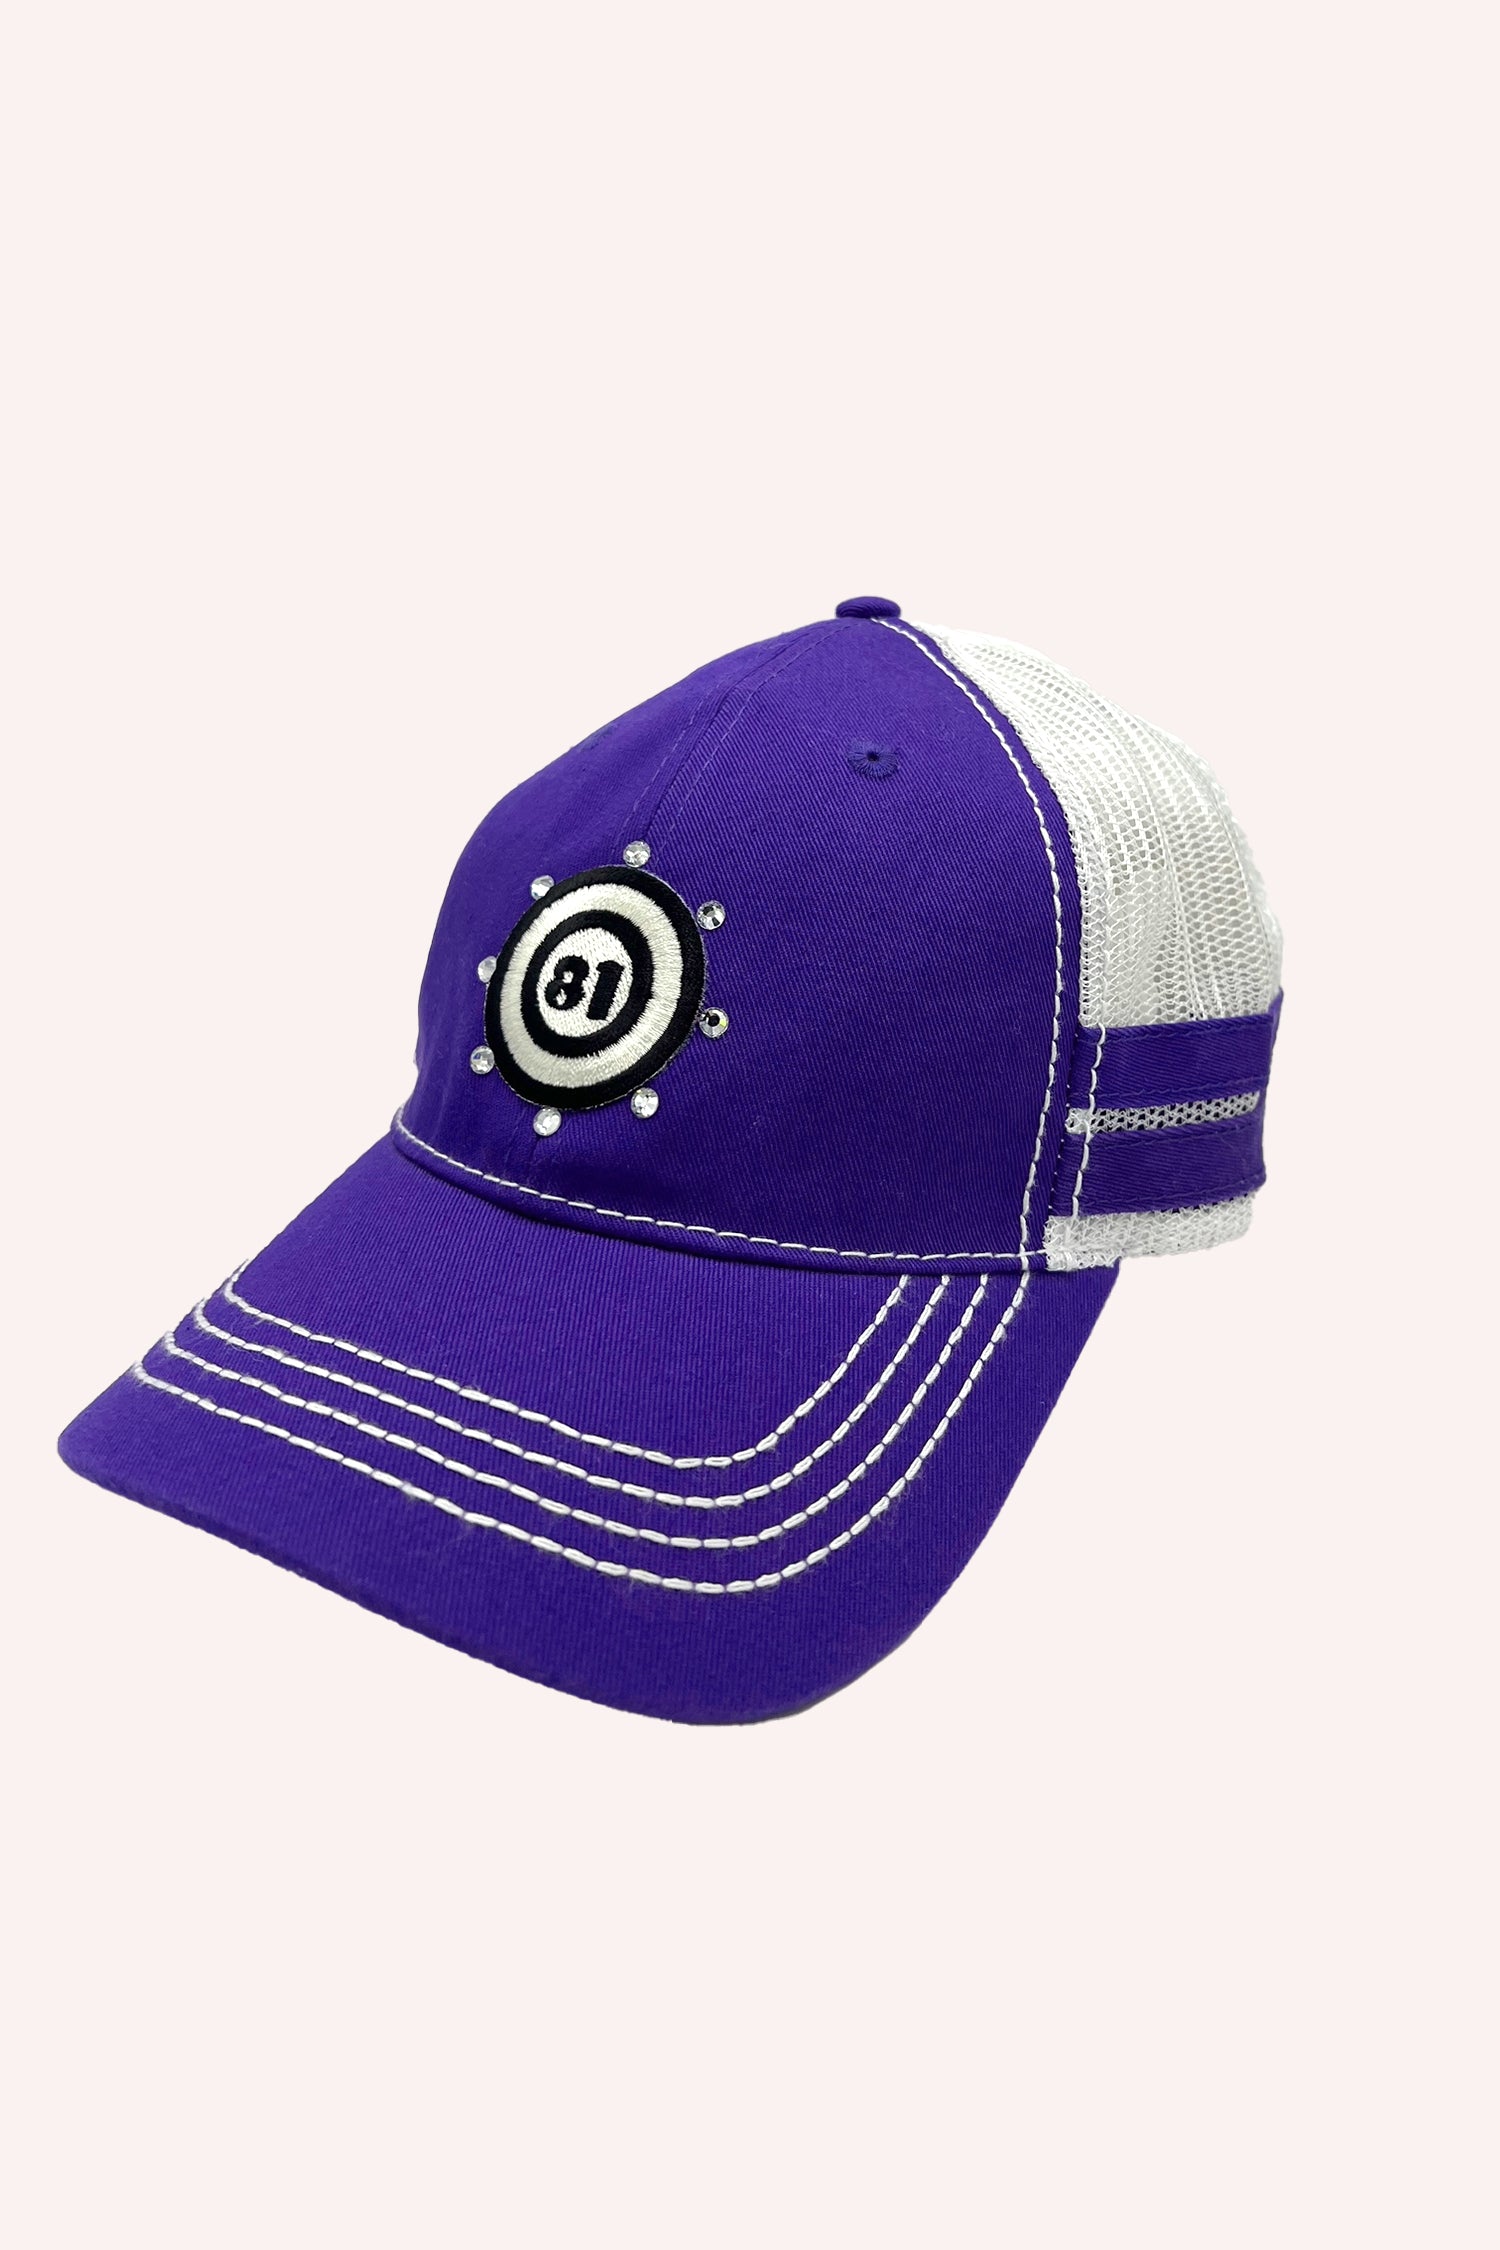 81 Trucker Hat Purple, “81” label in a black and white round target with 8-clear bead, white mesh on the back